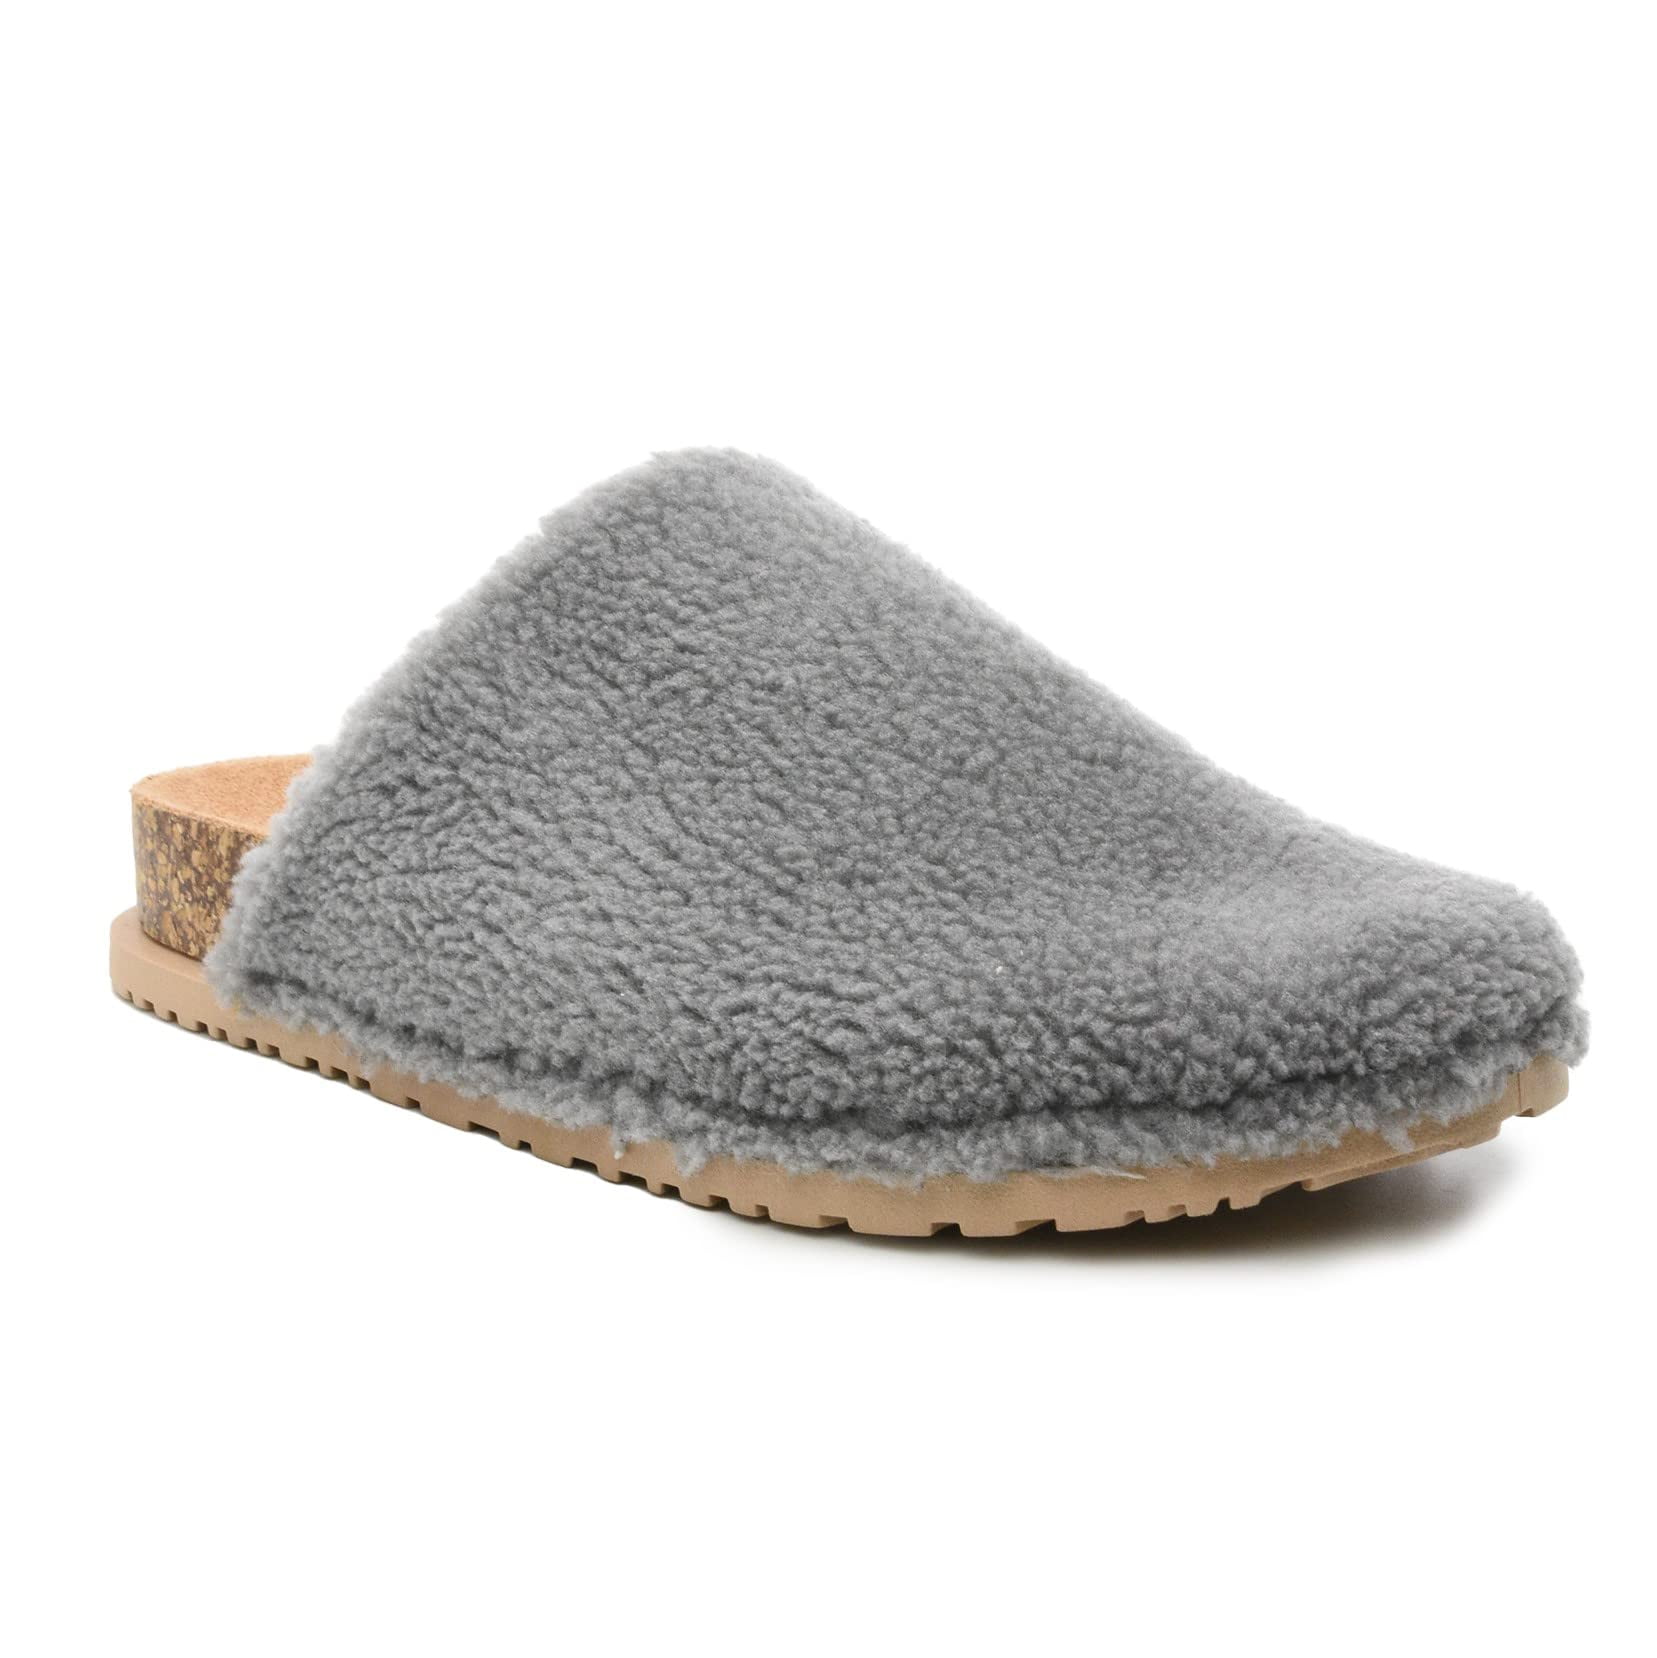 Nicole Bondy Womens Slippers for House, Indoor & Outdoor - Orthotics Cork Clogs Furry Faux Slipper with Fleece Lining & Support - Comfortable with Anti-Skid Rubber Outsole - Walmart.com